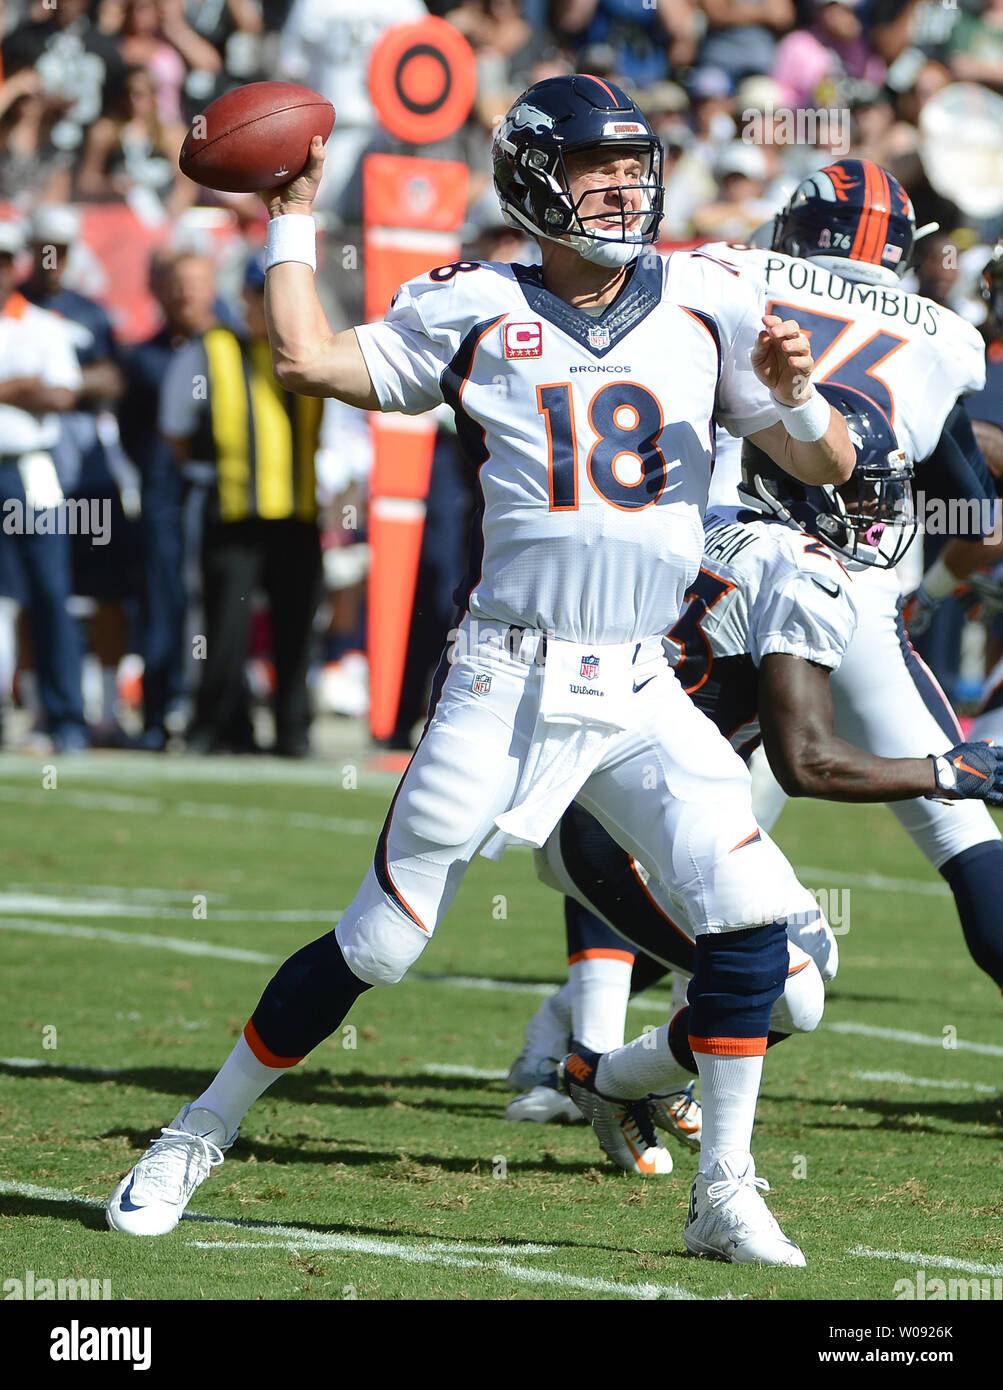 Denver Broncos QB Peyton Manning passes against the Oakland Raiders in the second quarter at O.co Coliseum in Oakland, California on October 11, 2015. The Broncos defeated the Raiders 16-10.  Photo by Terry Schmitt/UPI Stock Photo